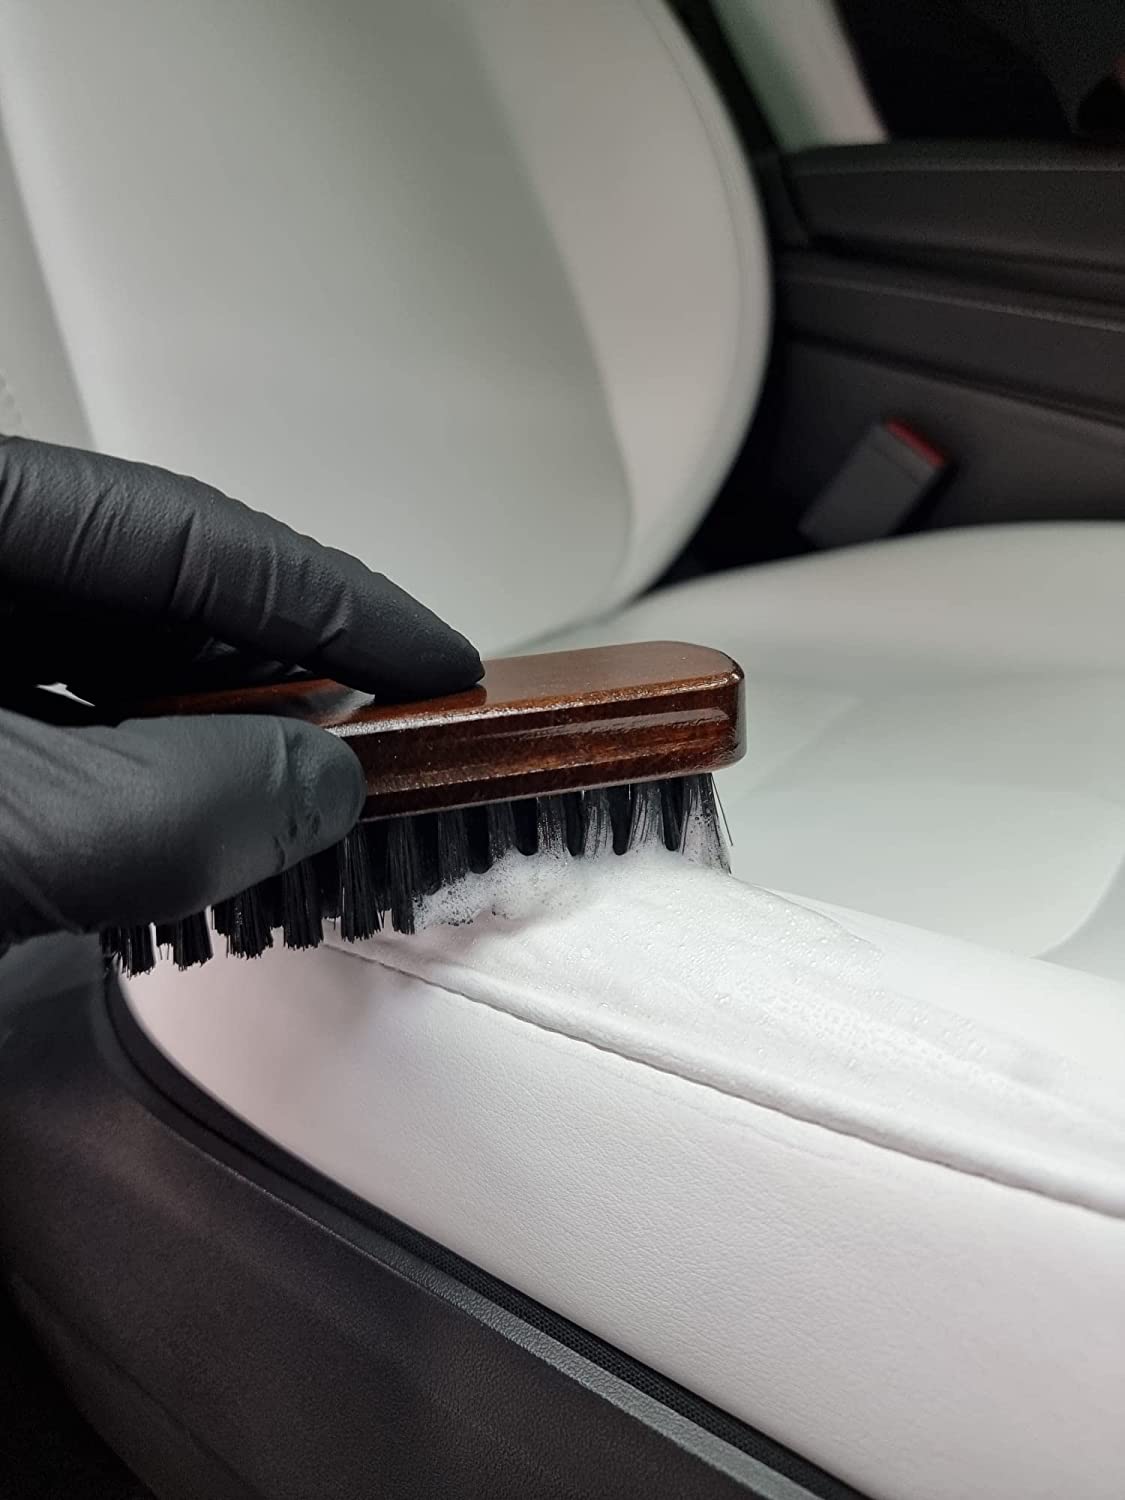 Geist. Leather & Upholstery Cleaning Brush